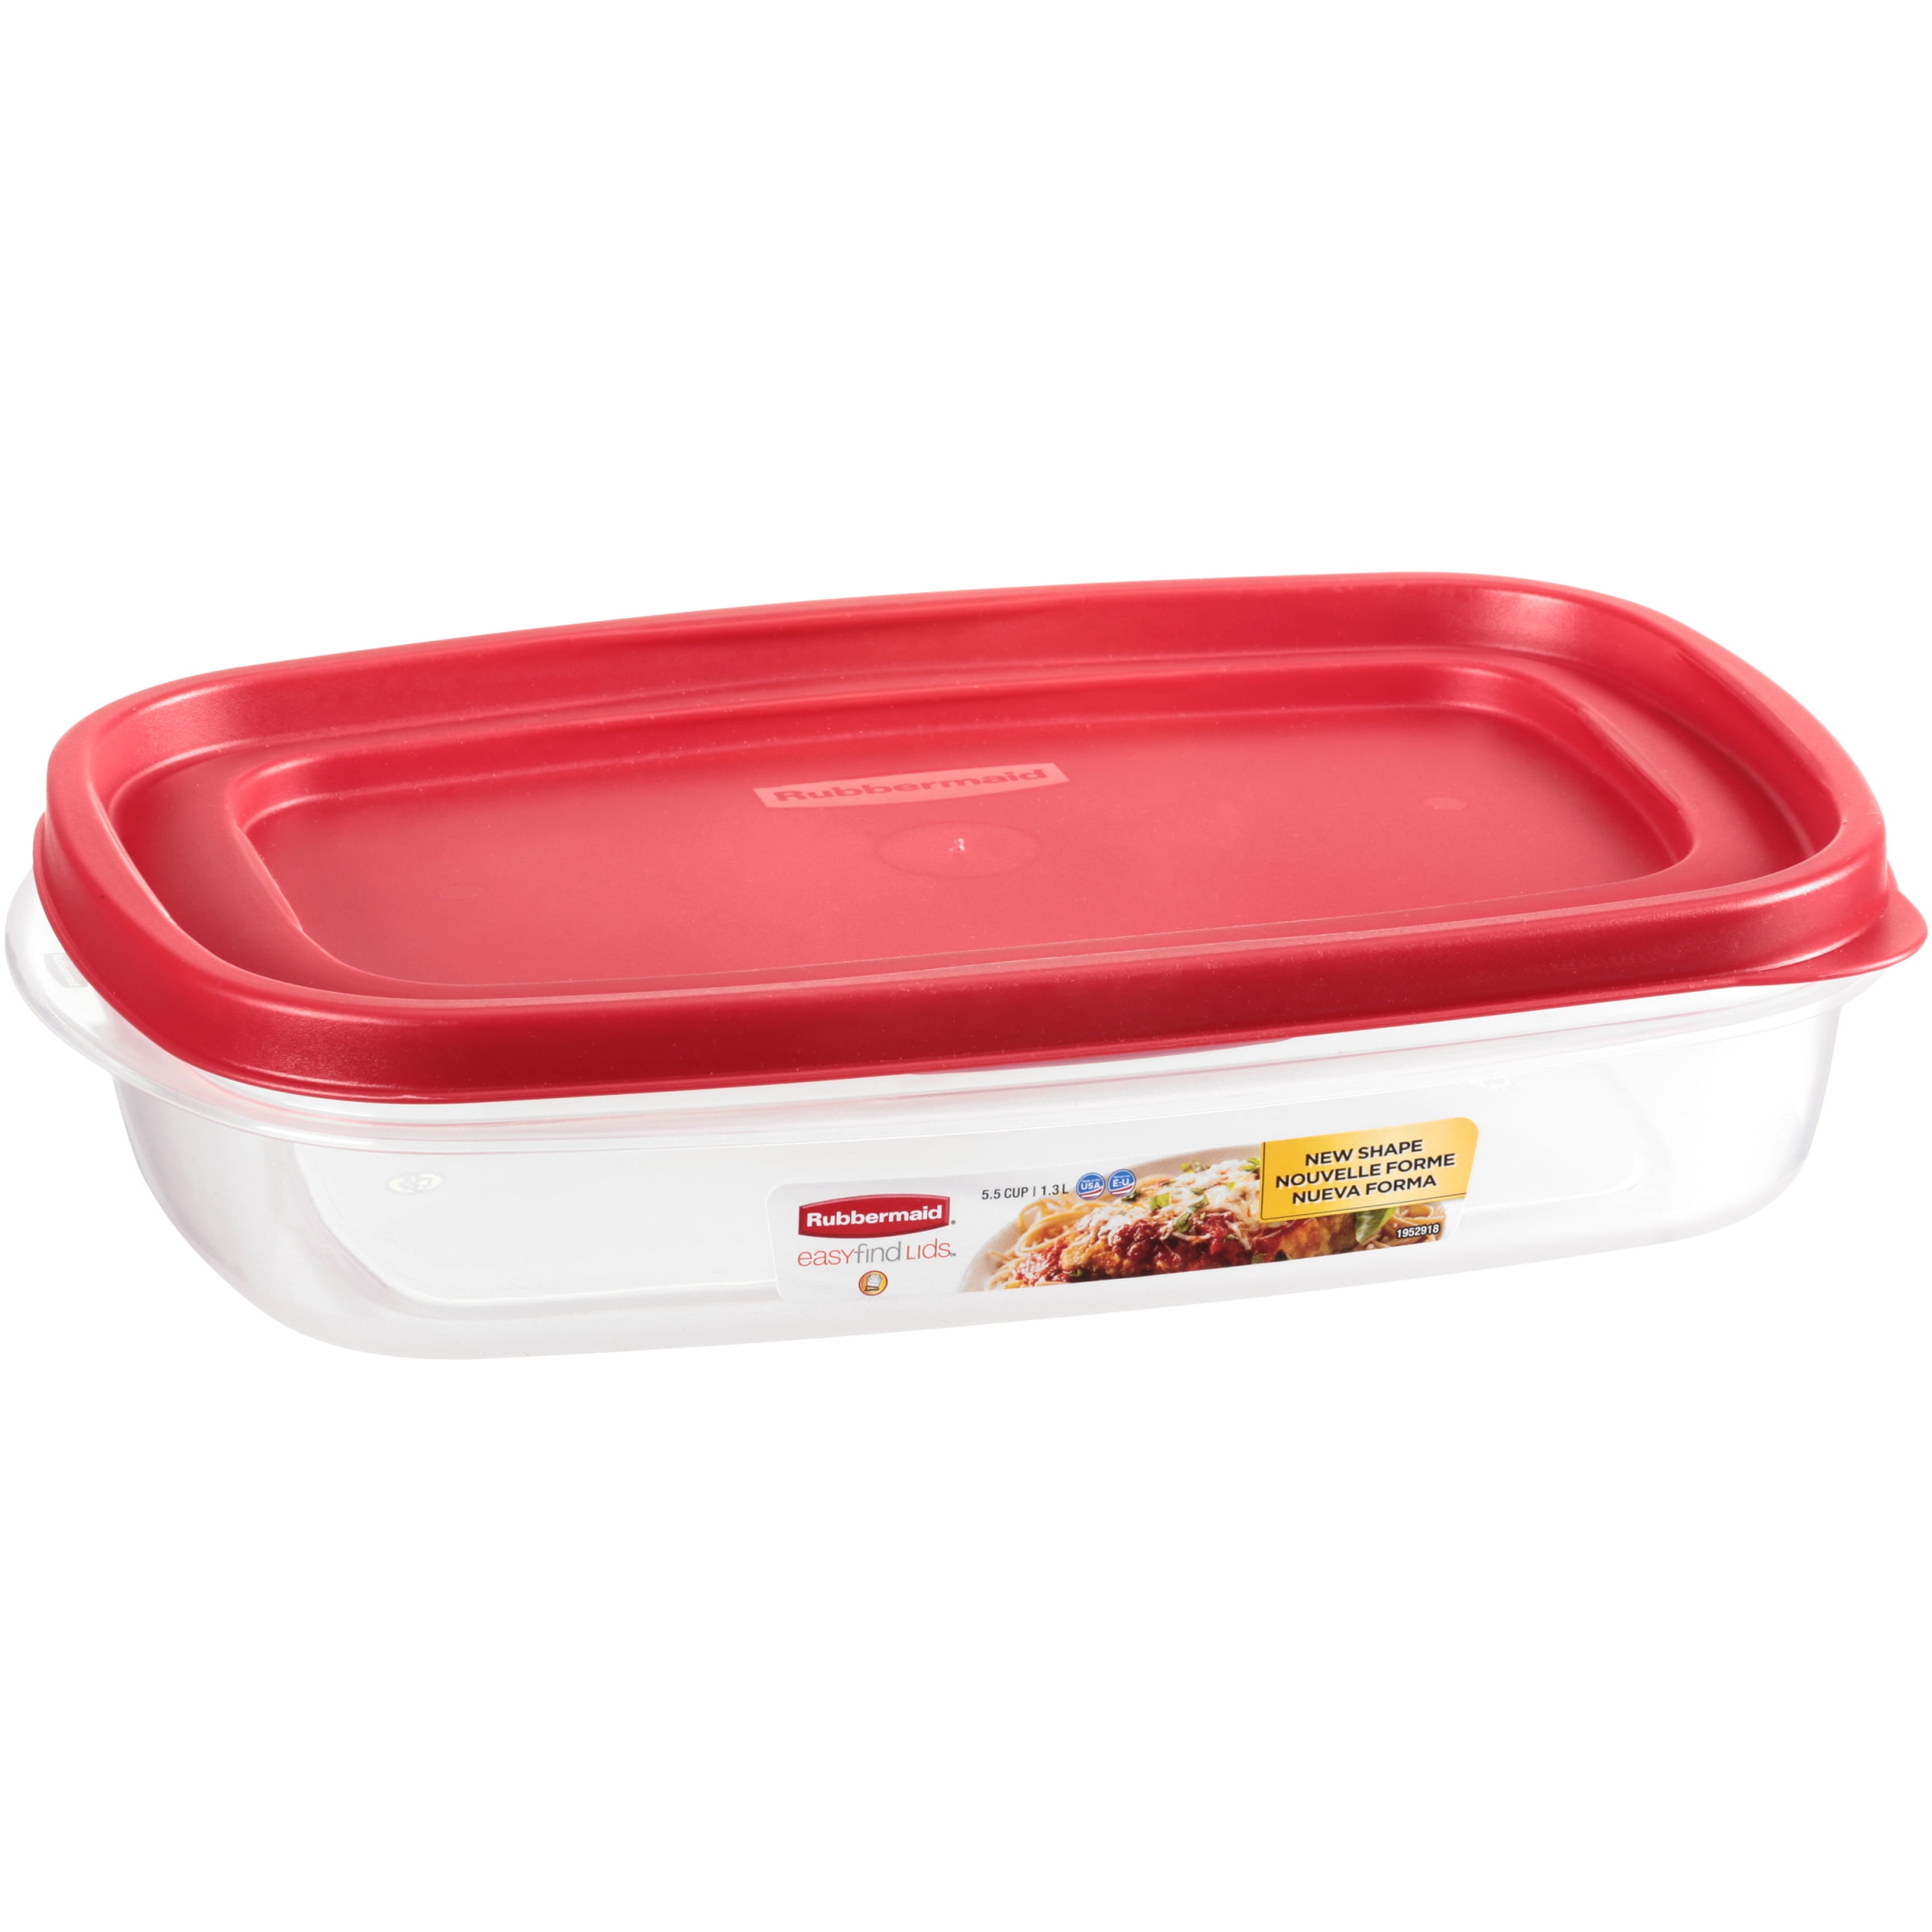  Rubbermaid Easy Find Lids Food Storage Container, 1.5